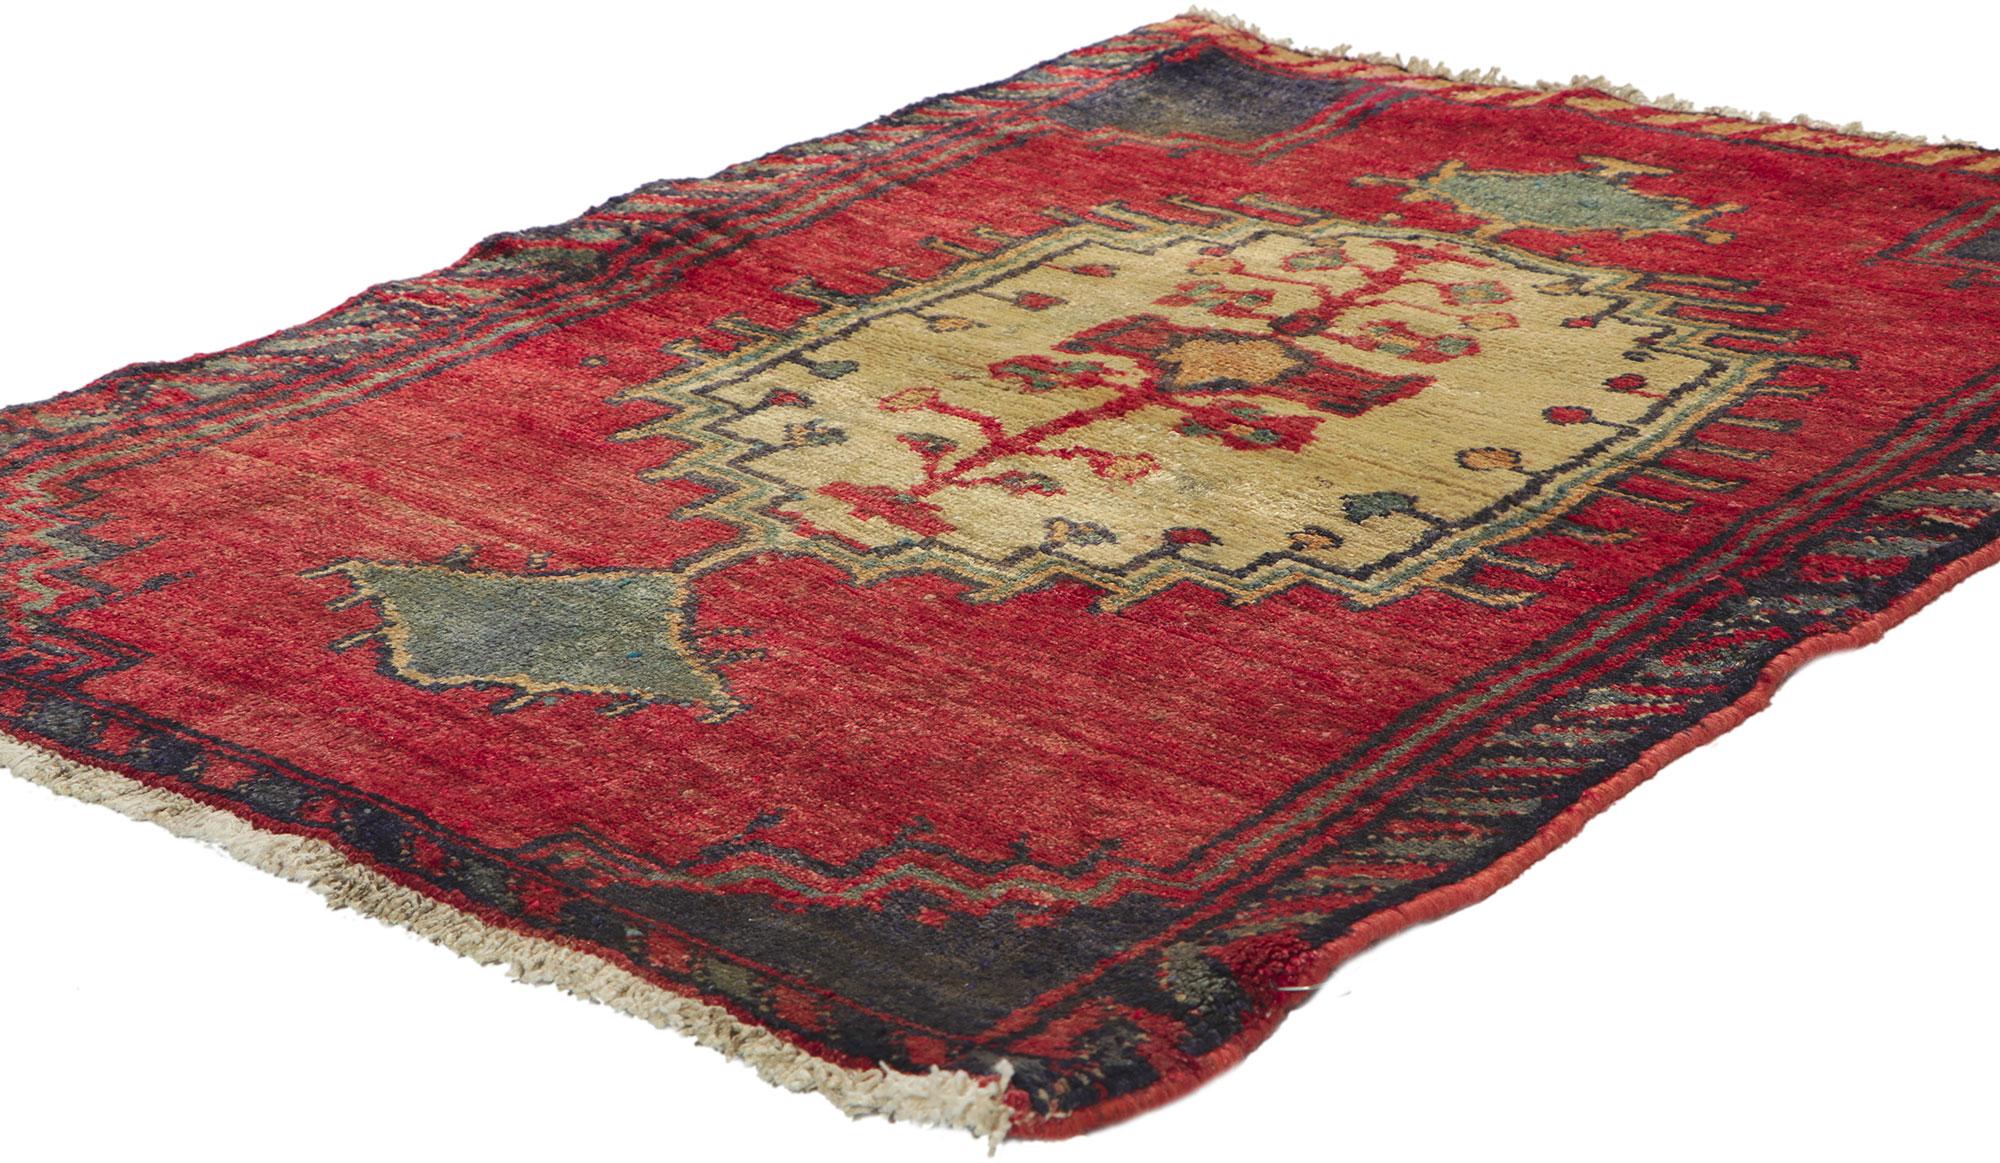 61077 Vintage Persian Shiraz rug with Tribal style, 02'11 x 03'11.